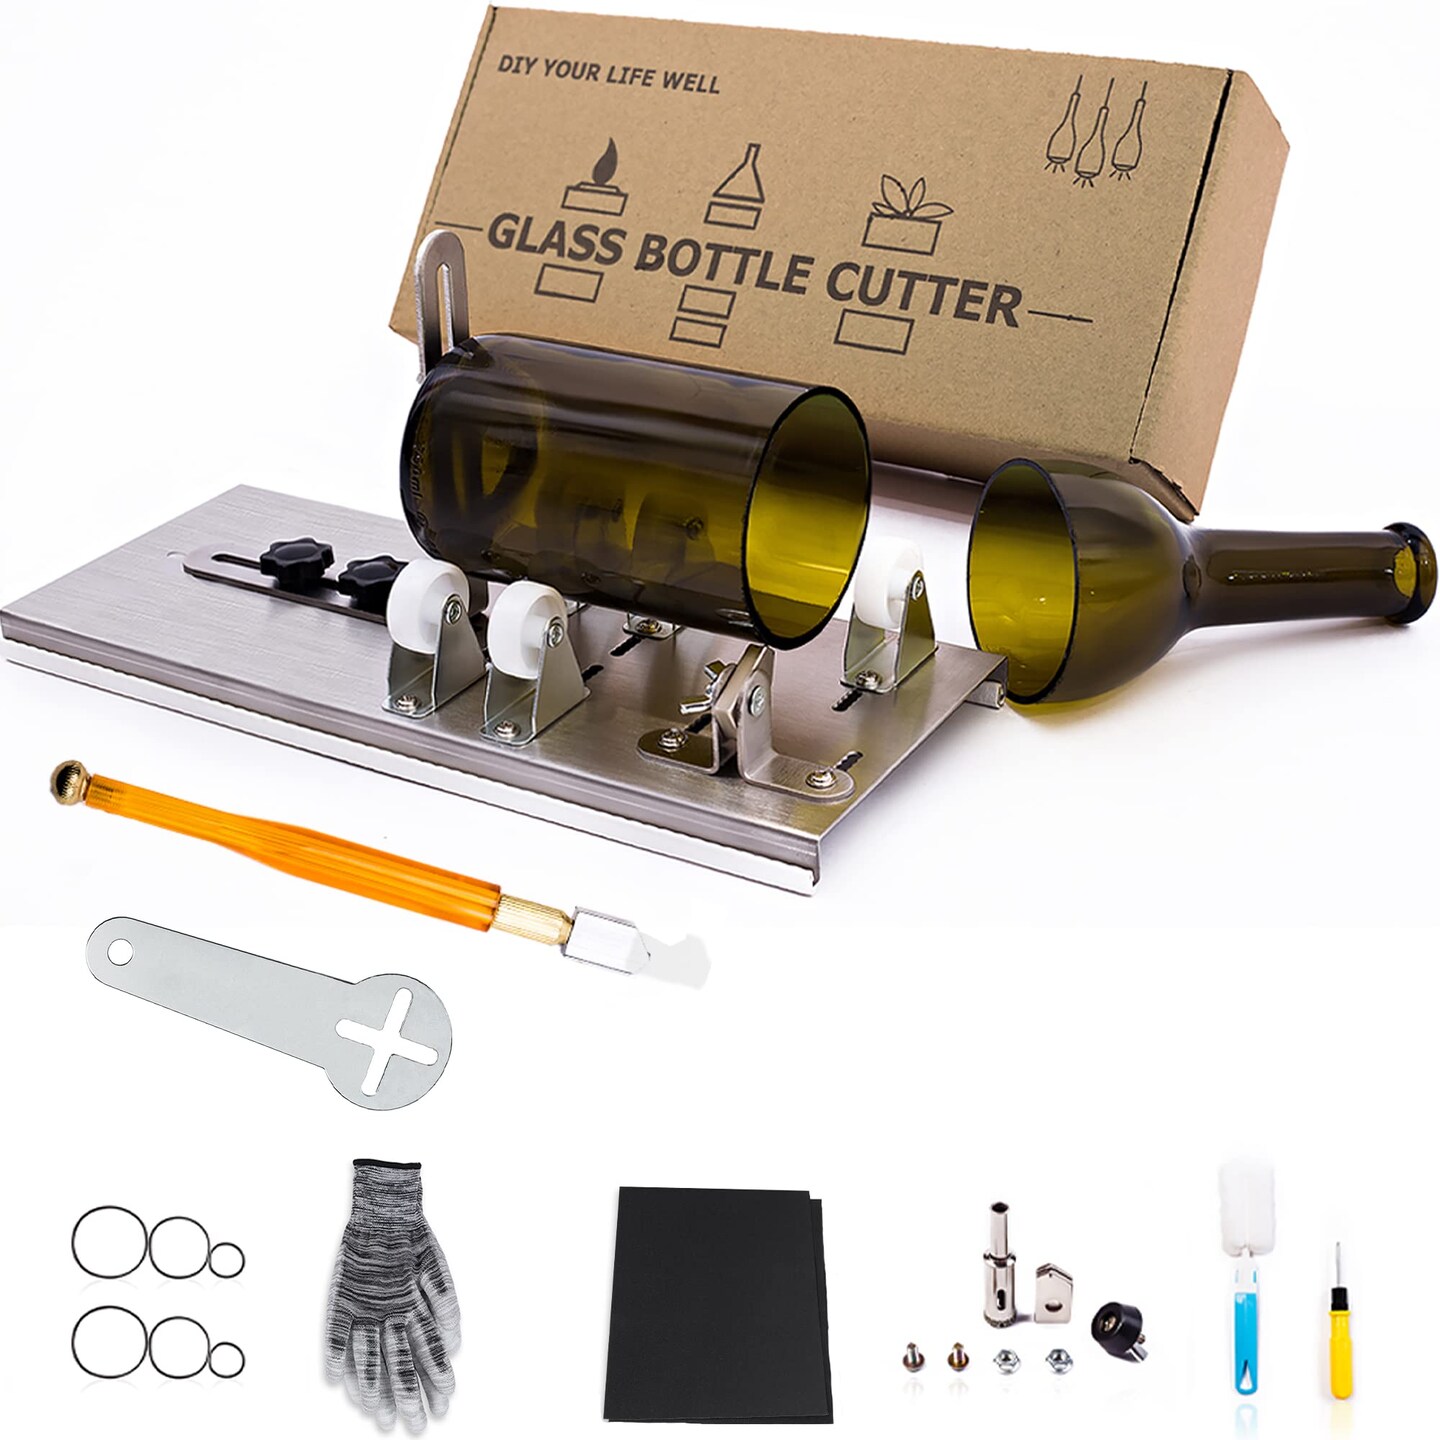 Creative Create Glass Bottle Cutter Kit with Adjustable Track System